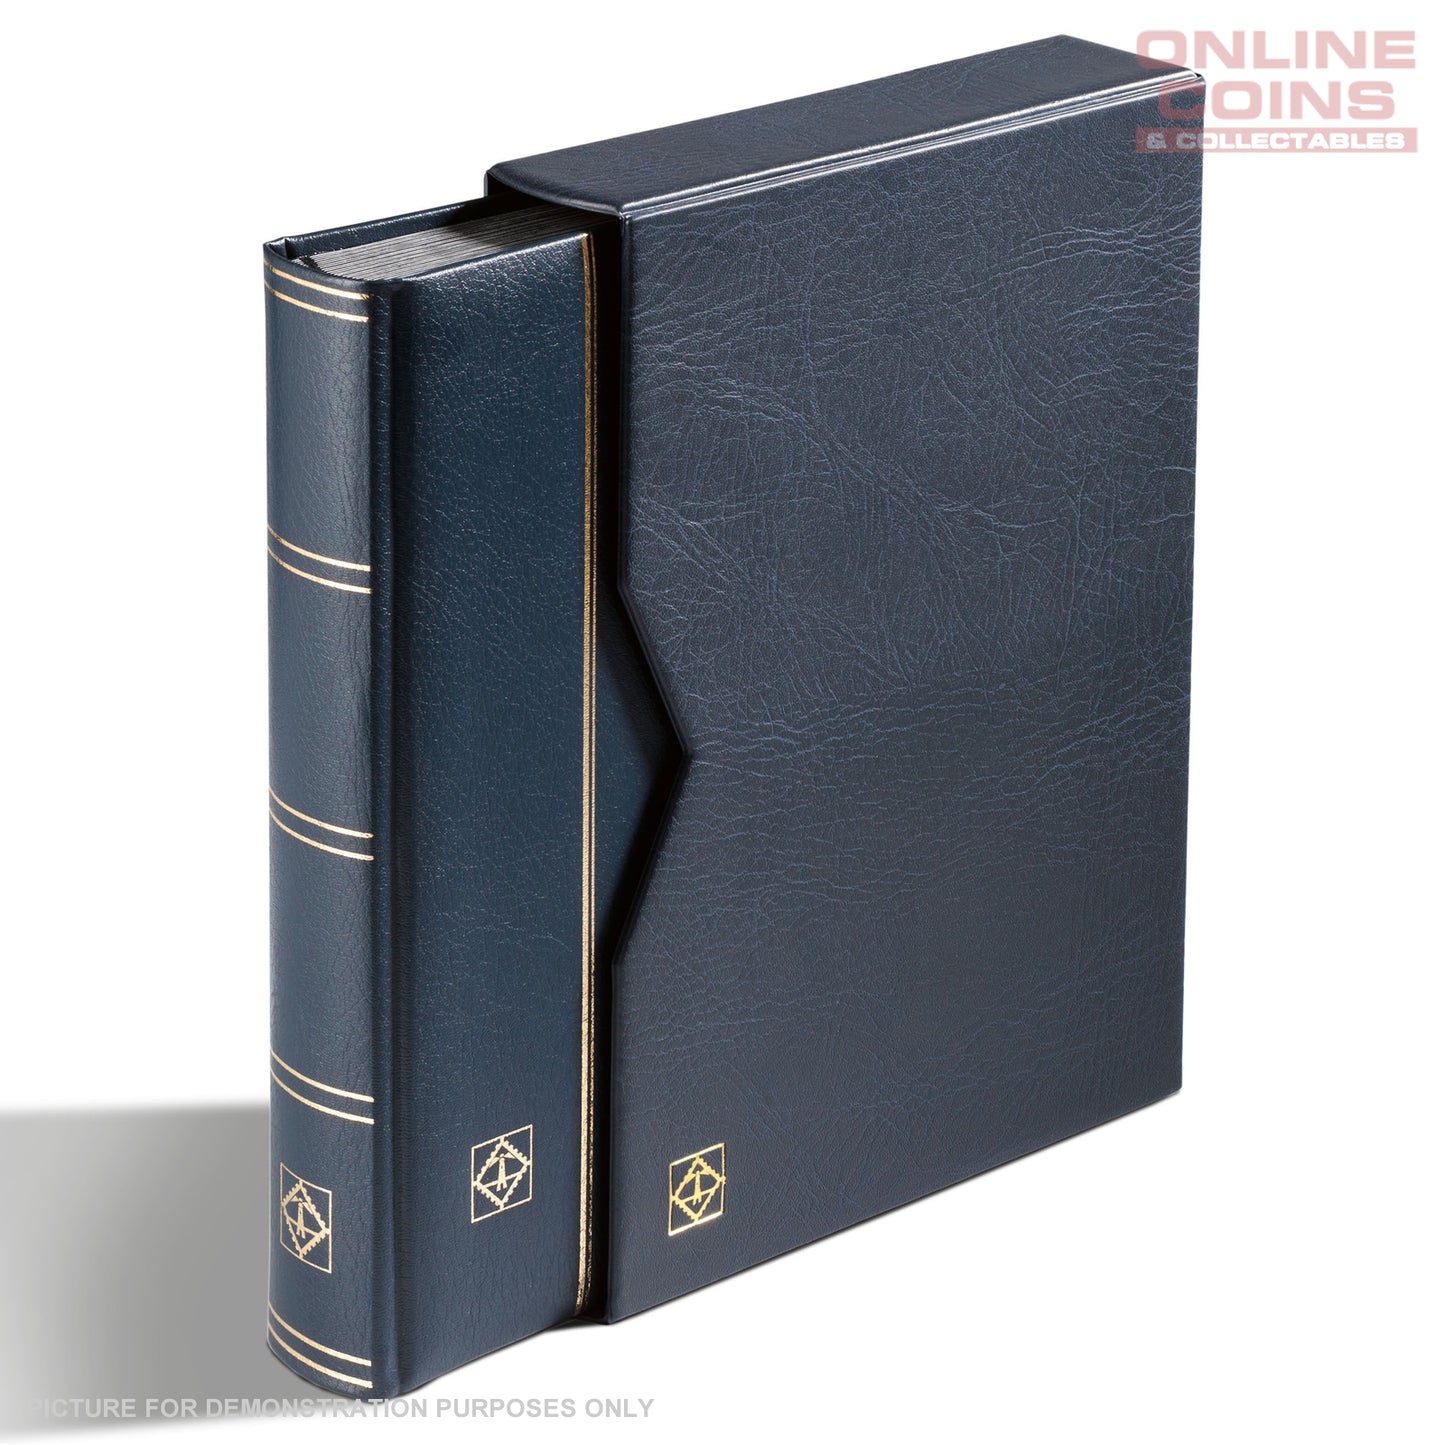 Lighthouse A4 PREMIUM Stockbook & Slipcase 64 Pages - Padded Leather Cover - RED